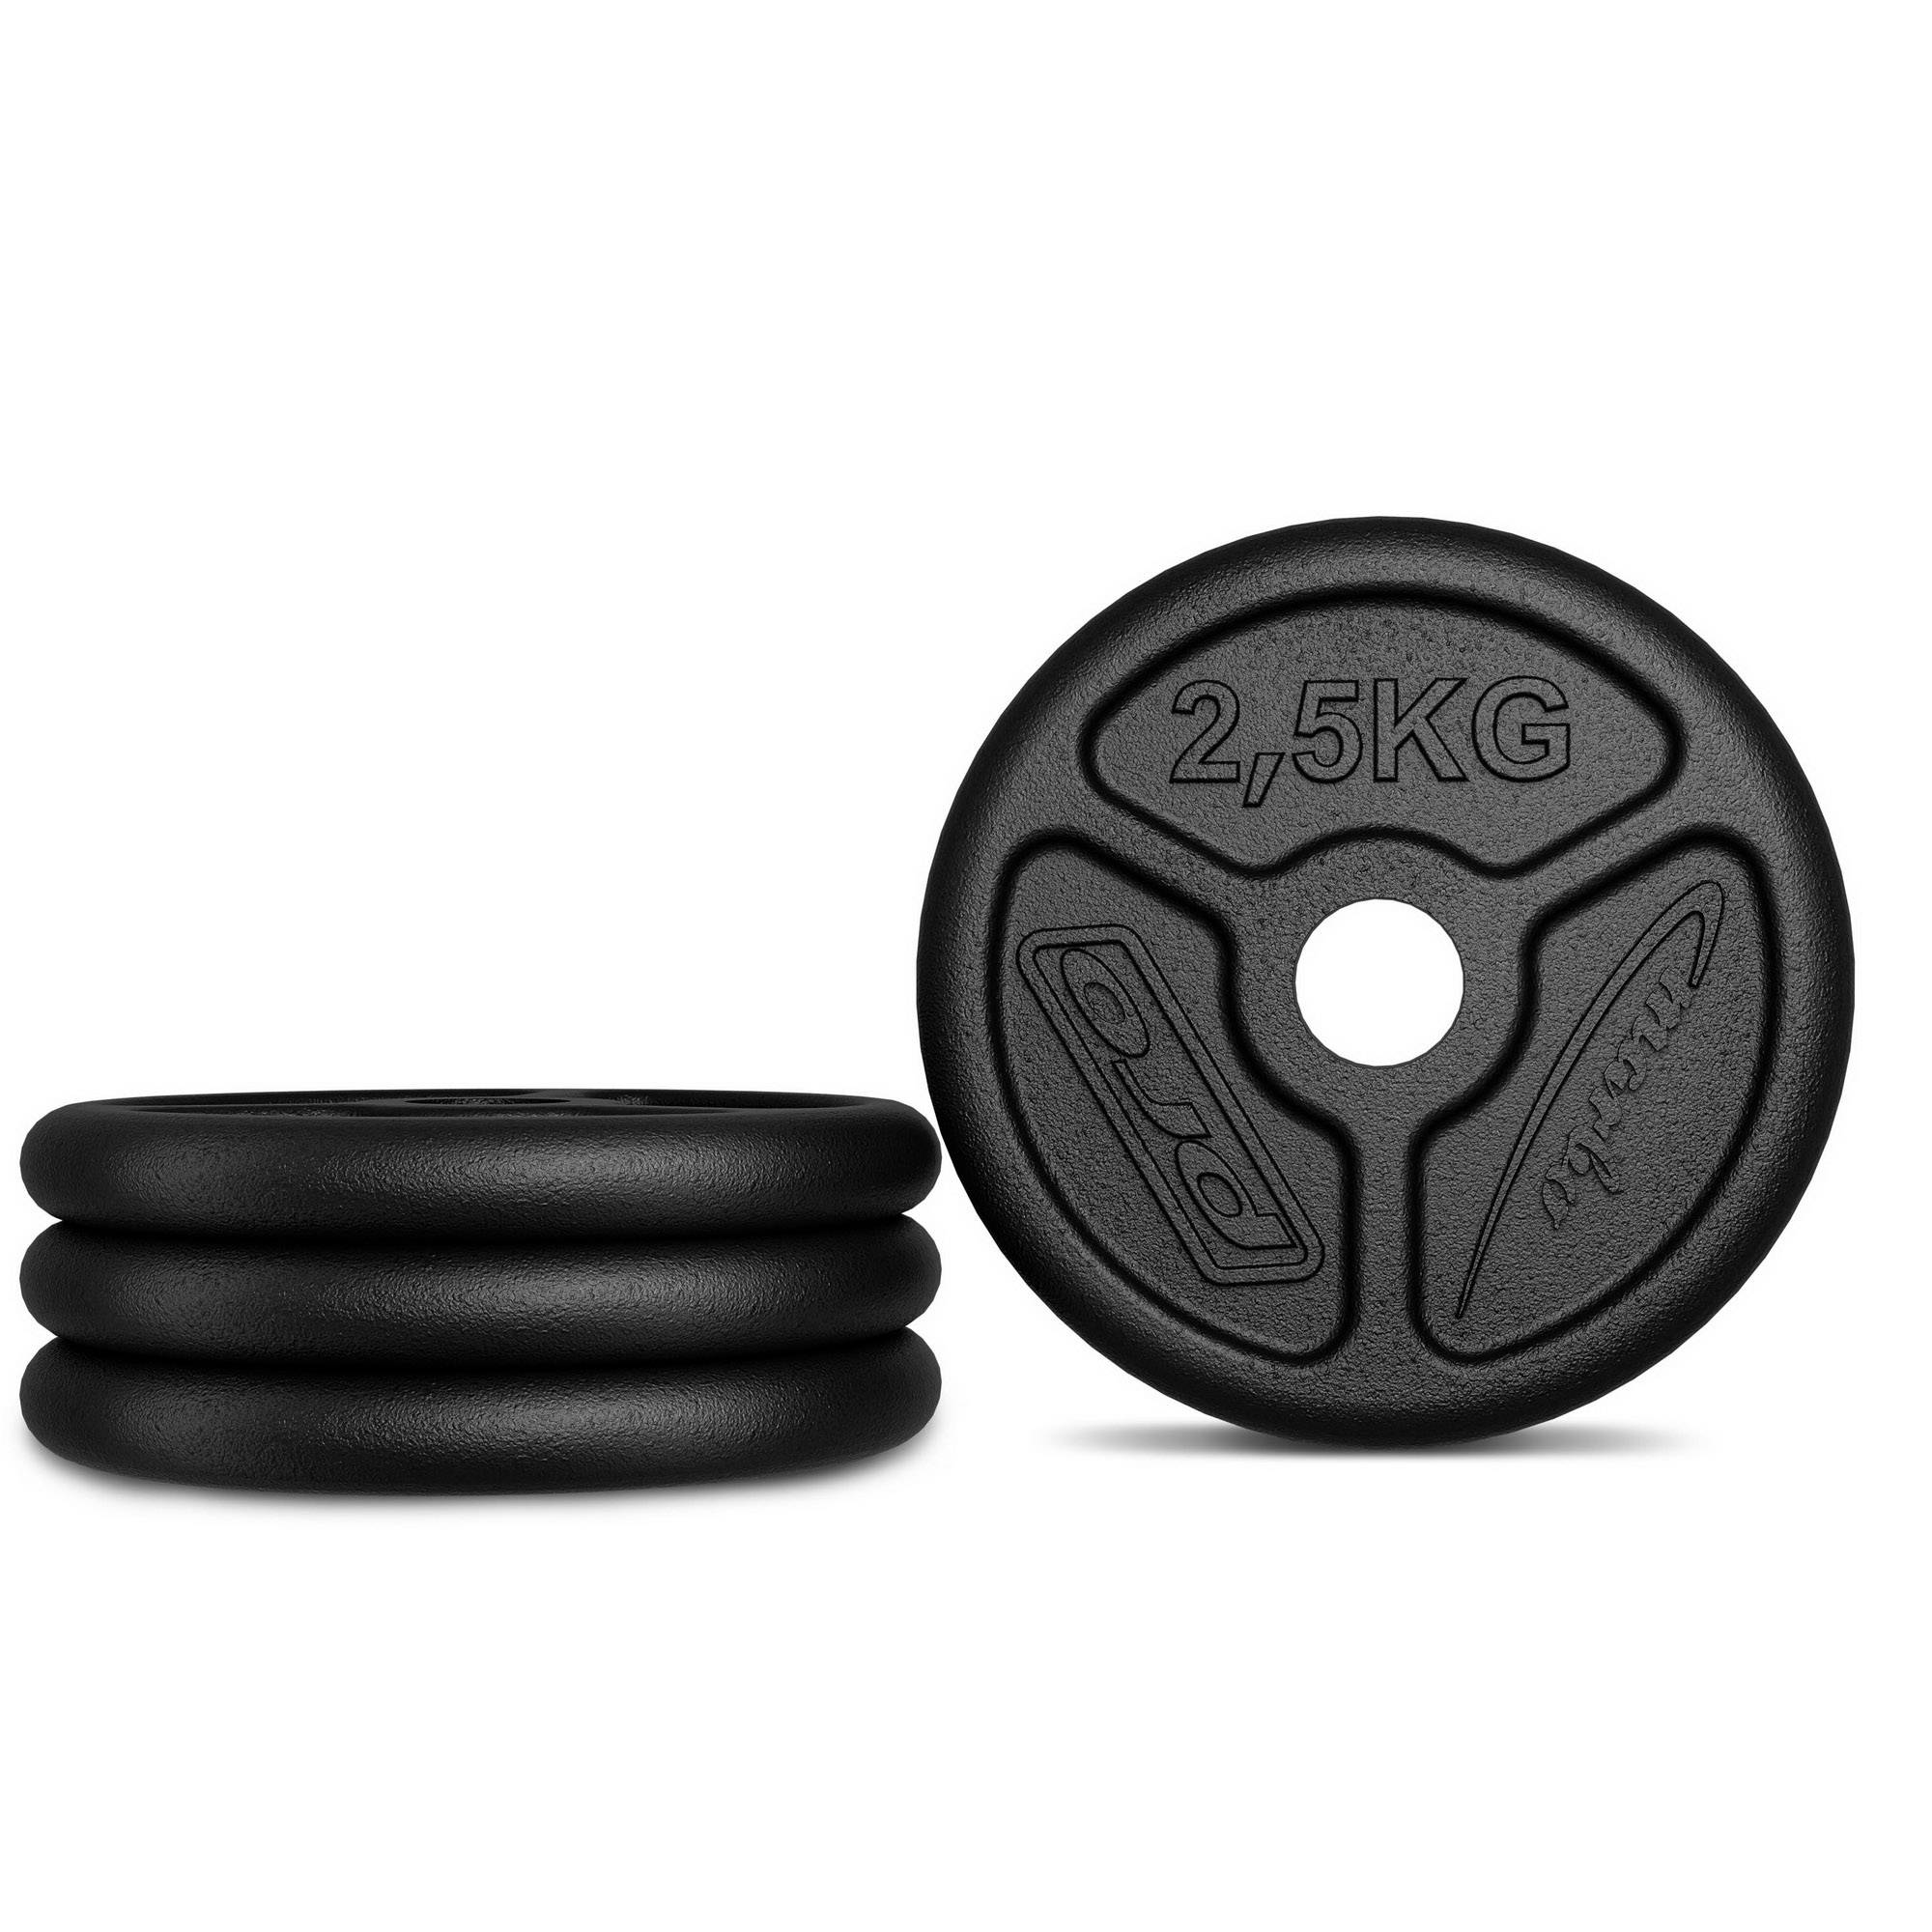 and Plates mm iron \\ Bars 2023 kg MW-O2,5-slim Cyber Weight with - 2.5 2,5 kg bore discs ø31 | Marbo Black Standard Week Standard Week Sport plates \\ plates Weight 2023 weight slim